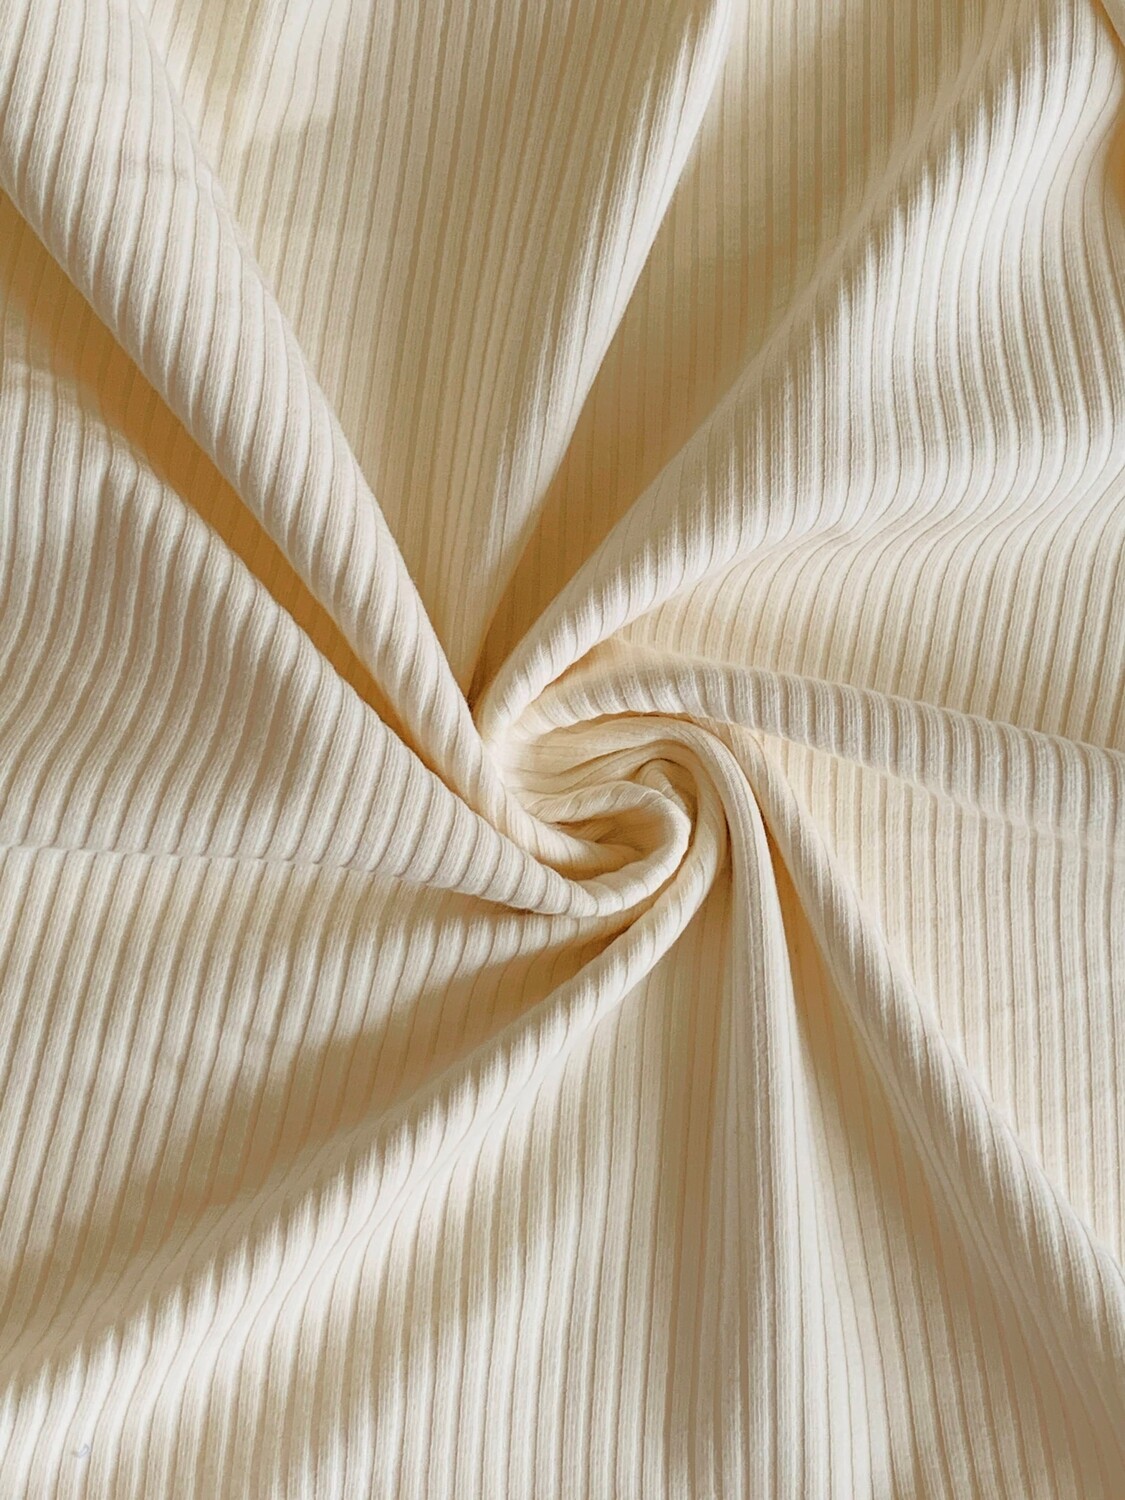 Cream | Ribbed Cotton Jersey Knit, 260gsm | 140cm Wide - 0.45m Piece